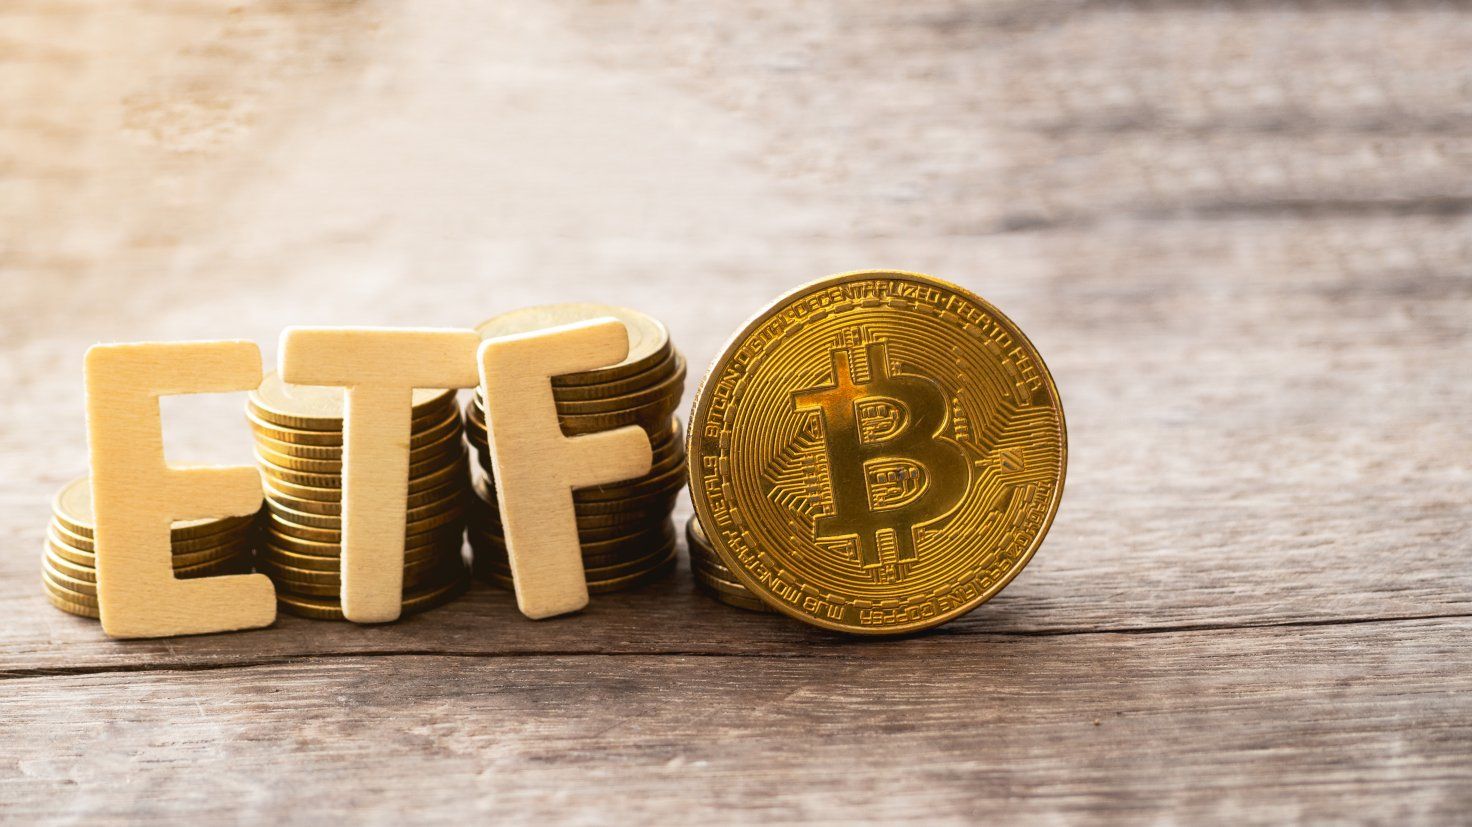 Some facts about Bitcoin ETF